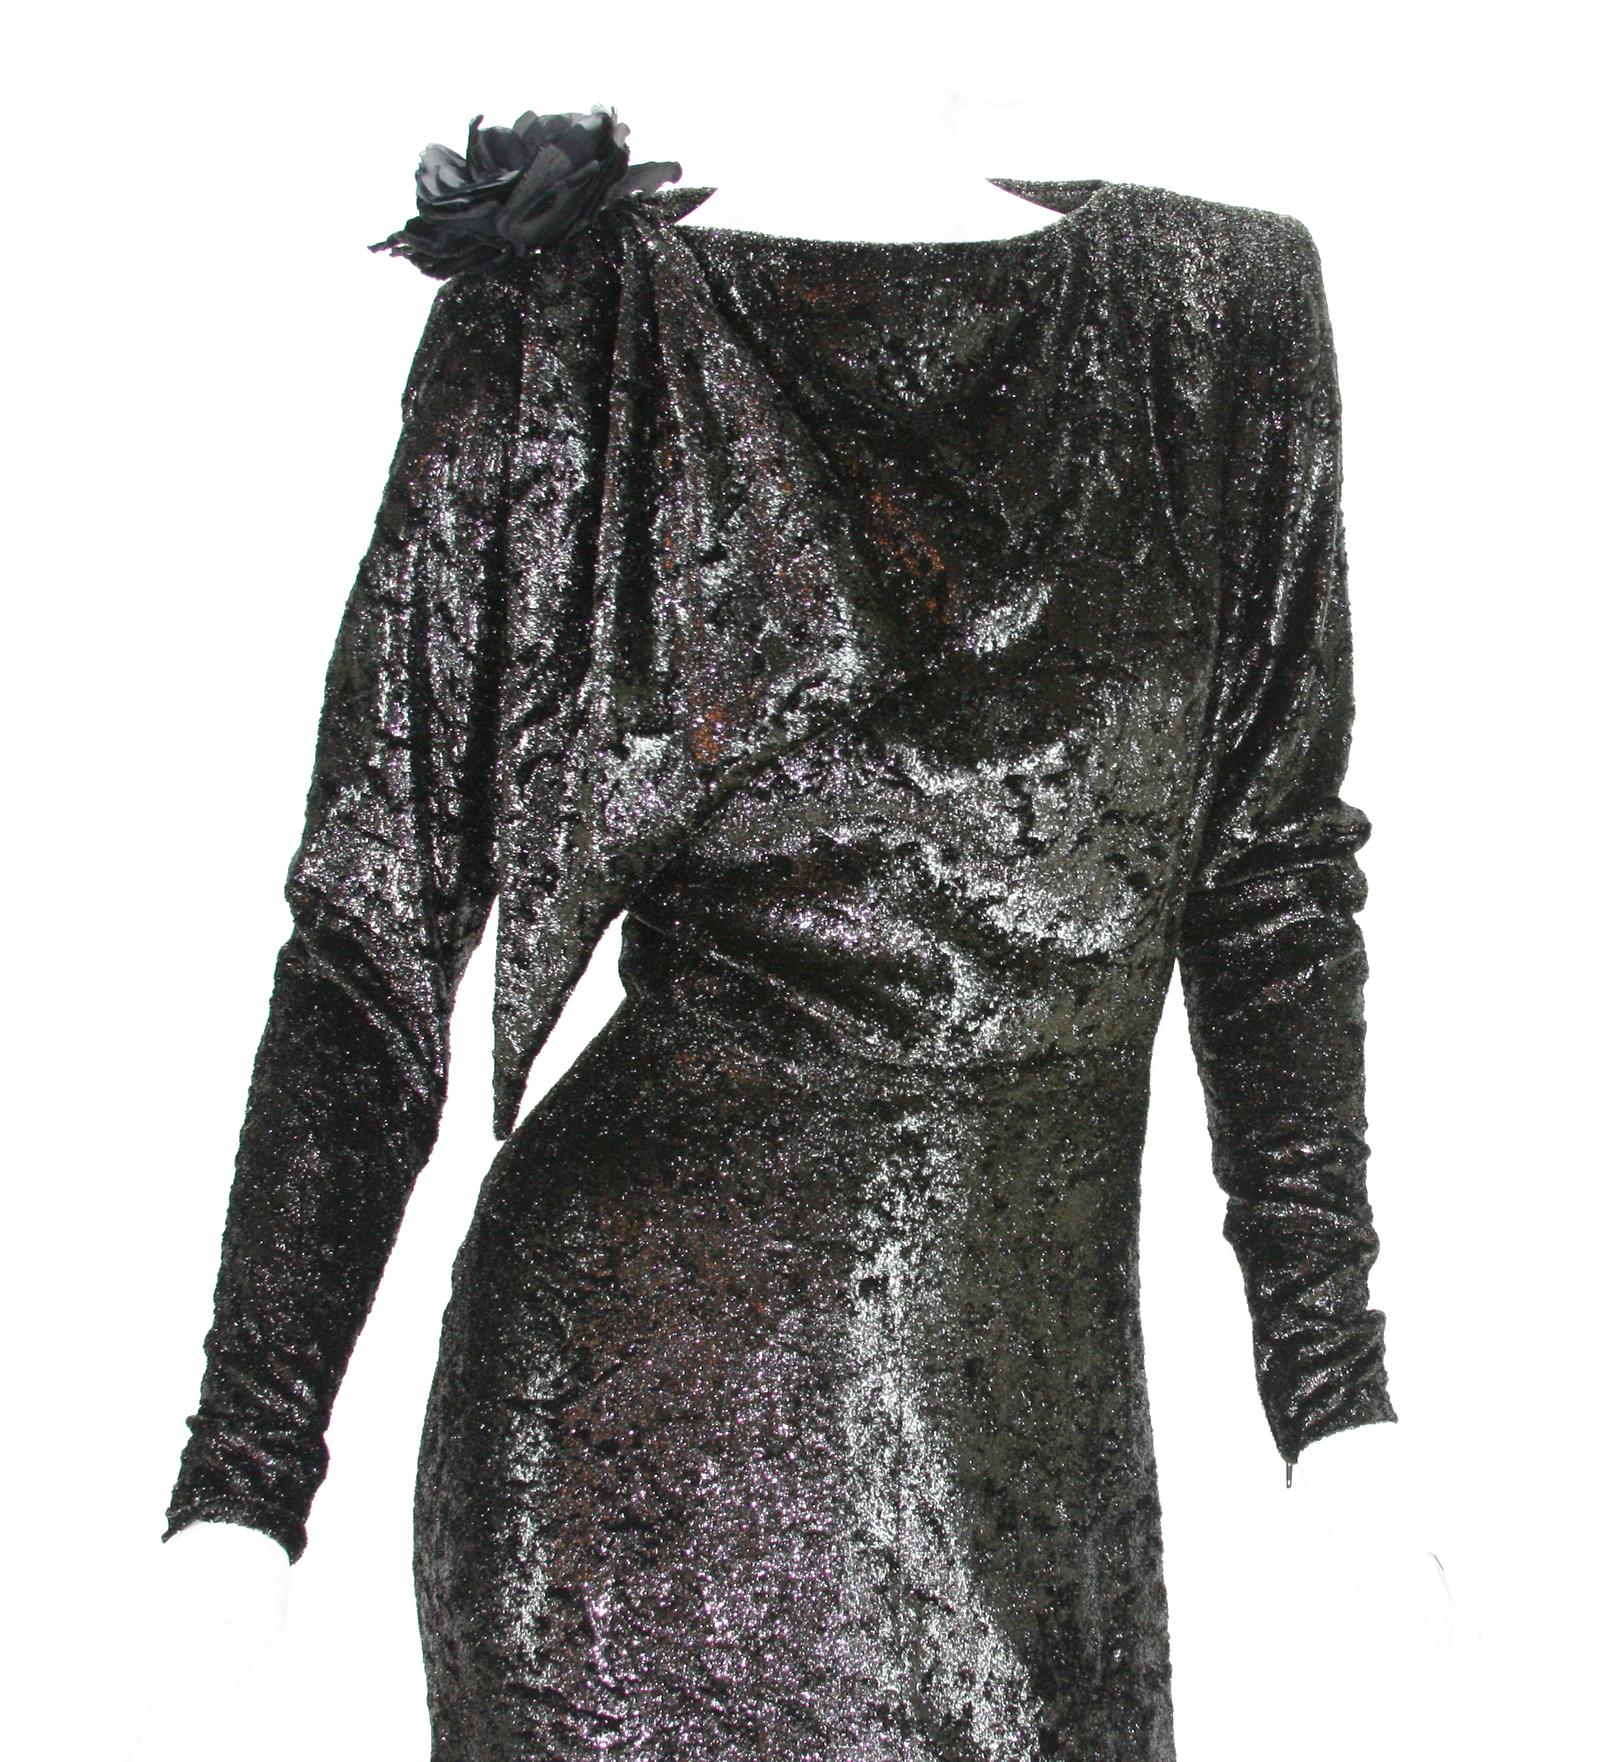 Rare 2 in 1 Yves Saint Laurent Couture Crushed Velvet Numbered Dress c. 1986 For Sale 3